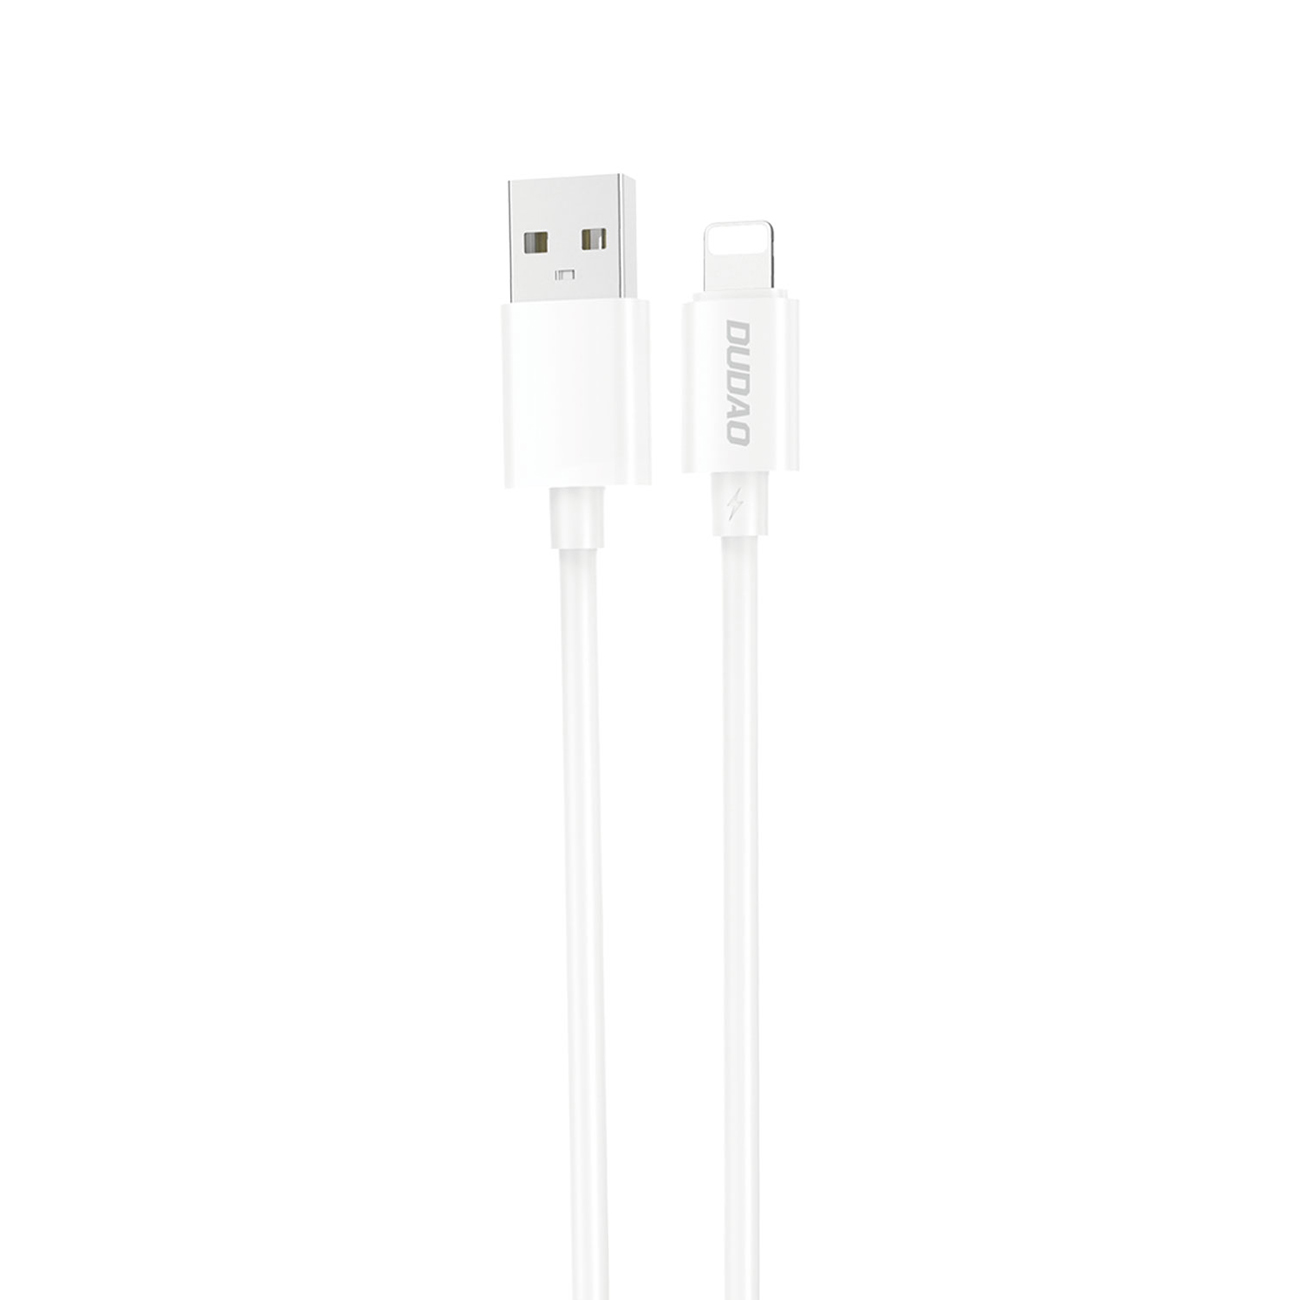 Dudao L4SL cable with USB-A/Lightning connectors with a current of 5 A and a length of 1 m on a white background